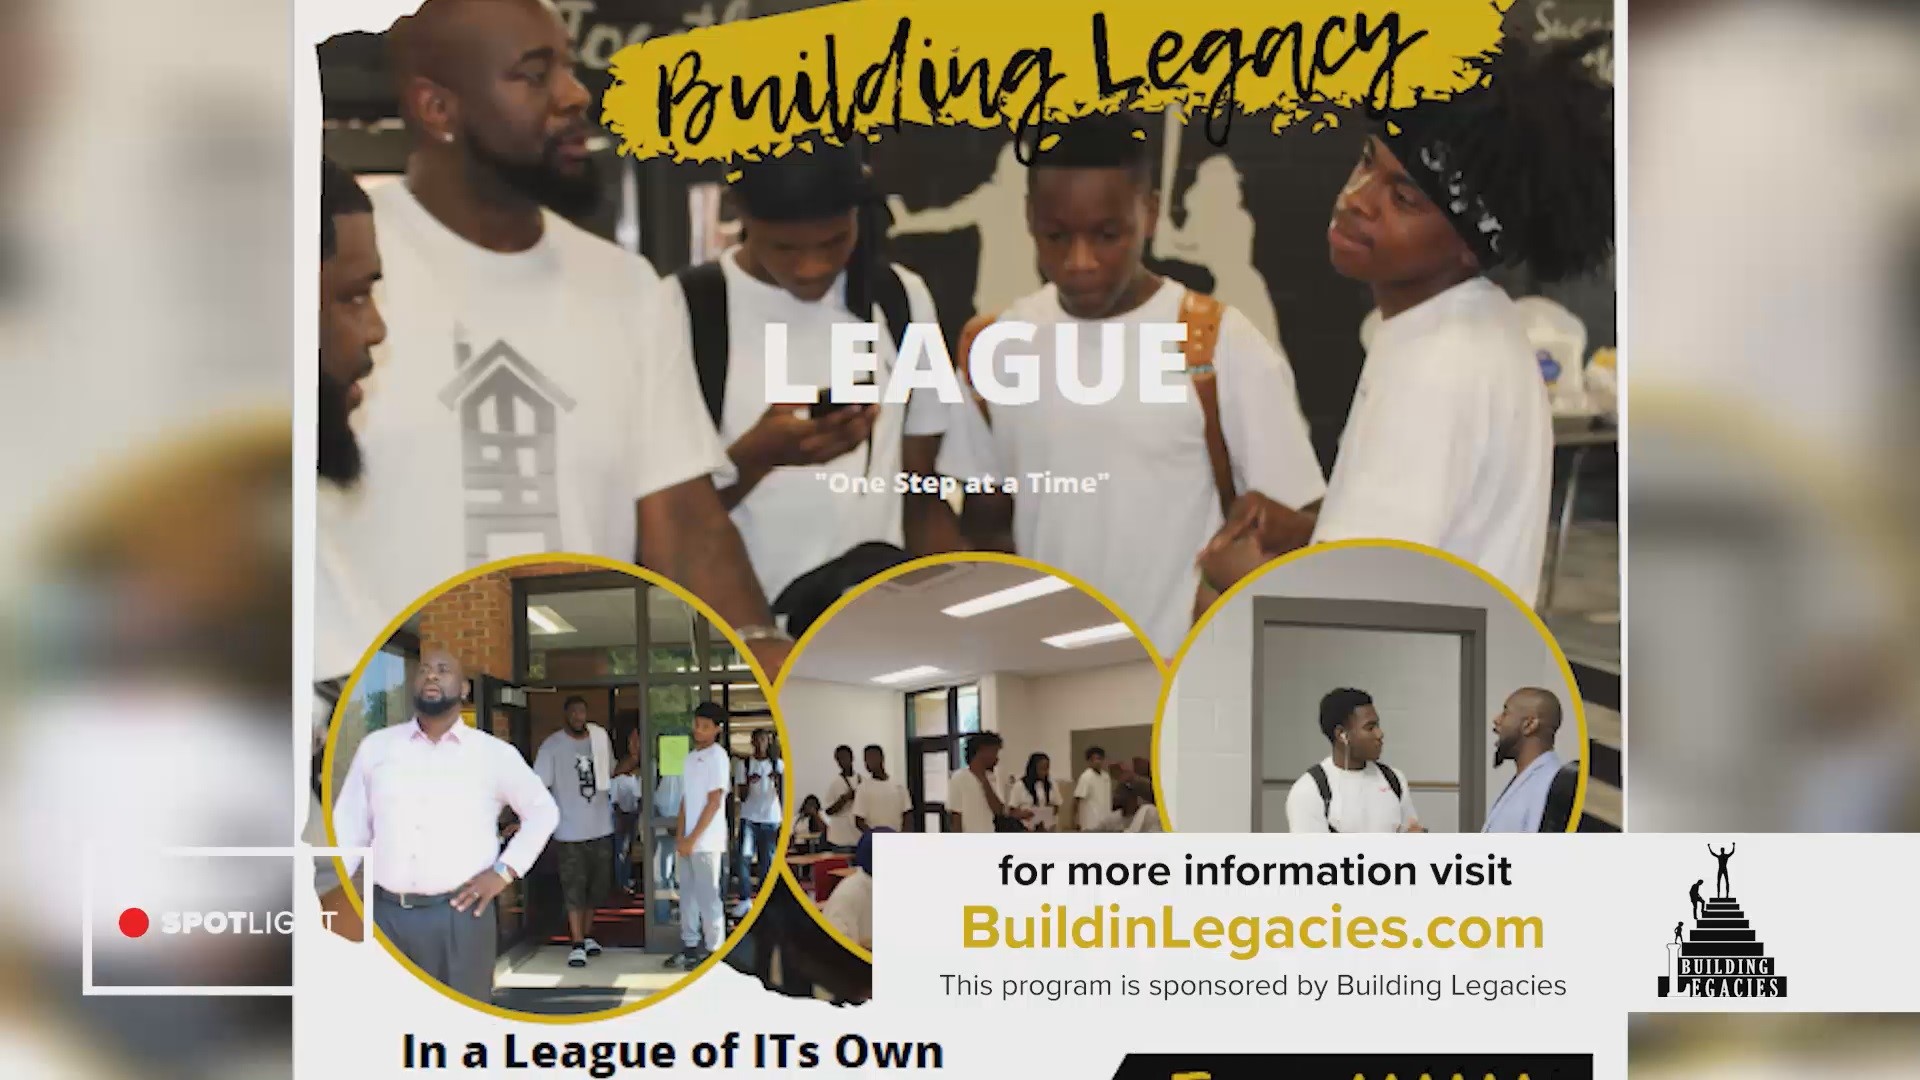 Building Legacies is a non-profit organization that provides all-inclusive educational services for educators, students, families, and communities.